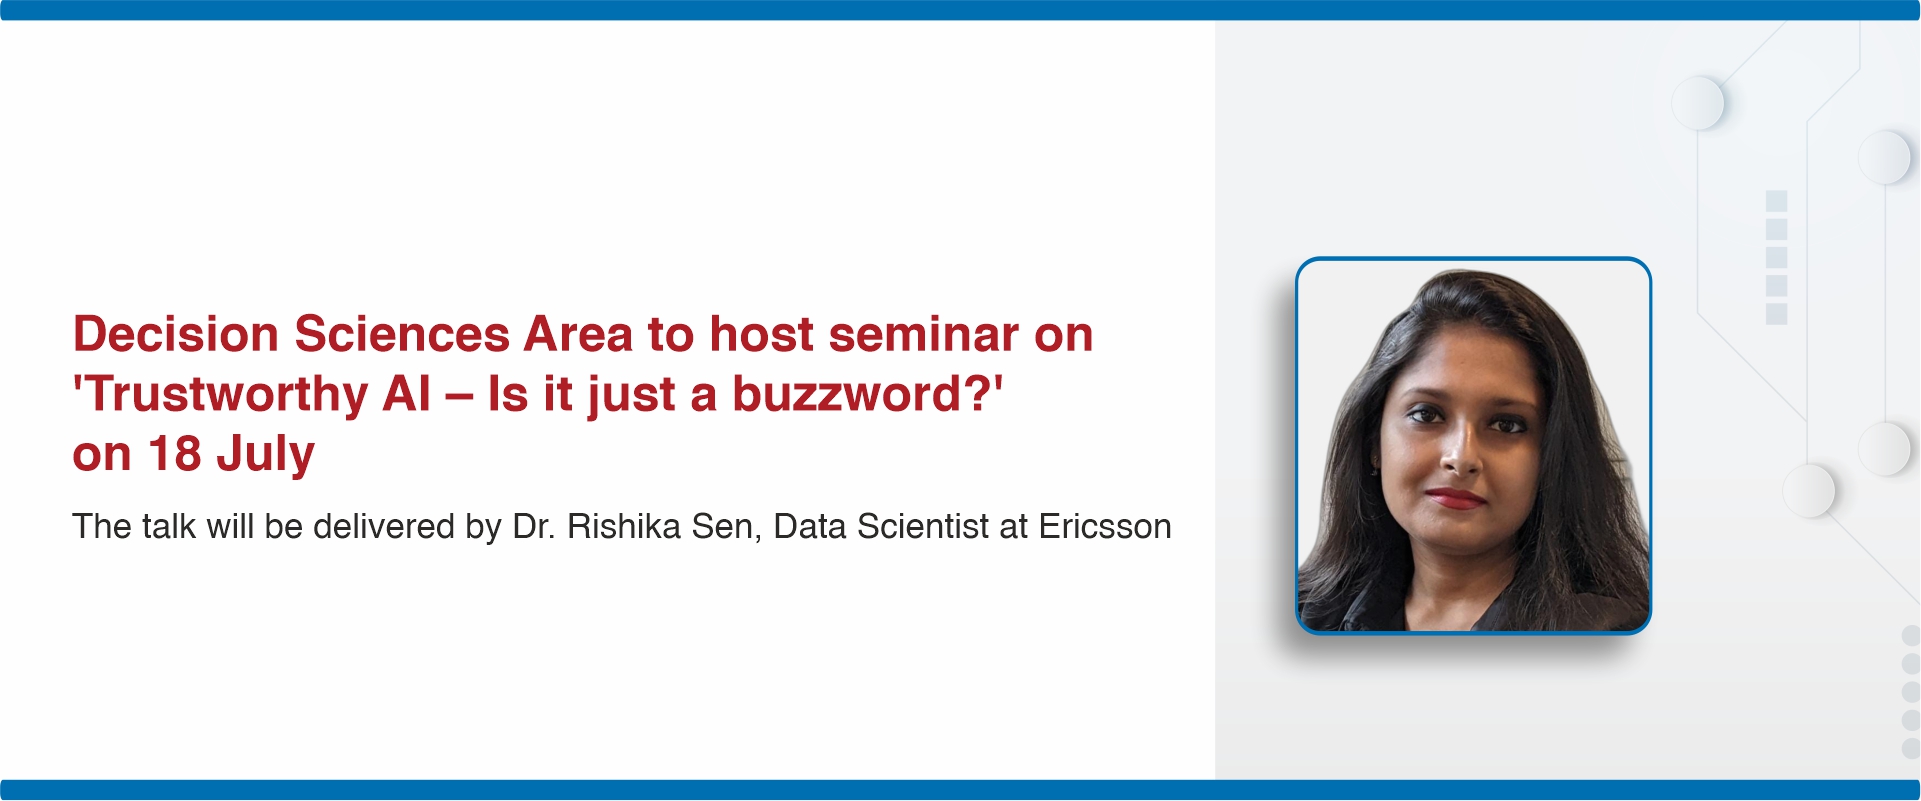 Decision Sciences Area to host seminar on ‘Trustworthy AI – Is it just a buzzword?’ on 18 July